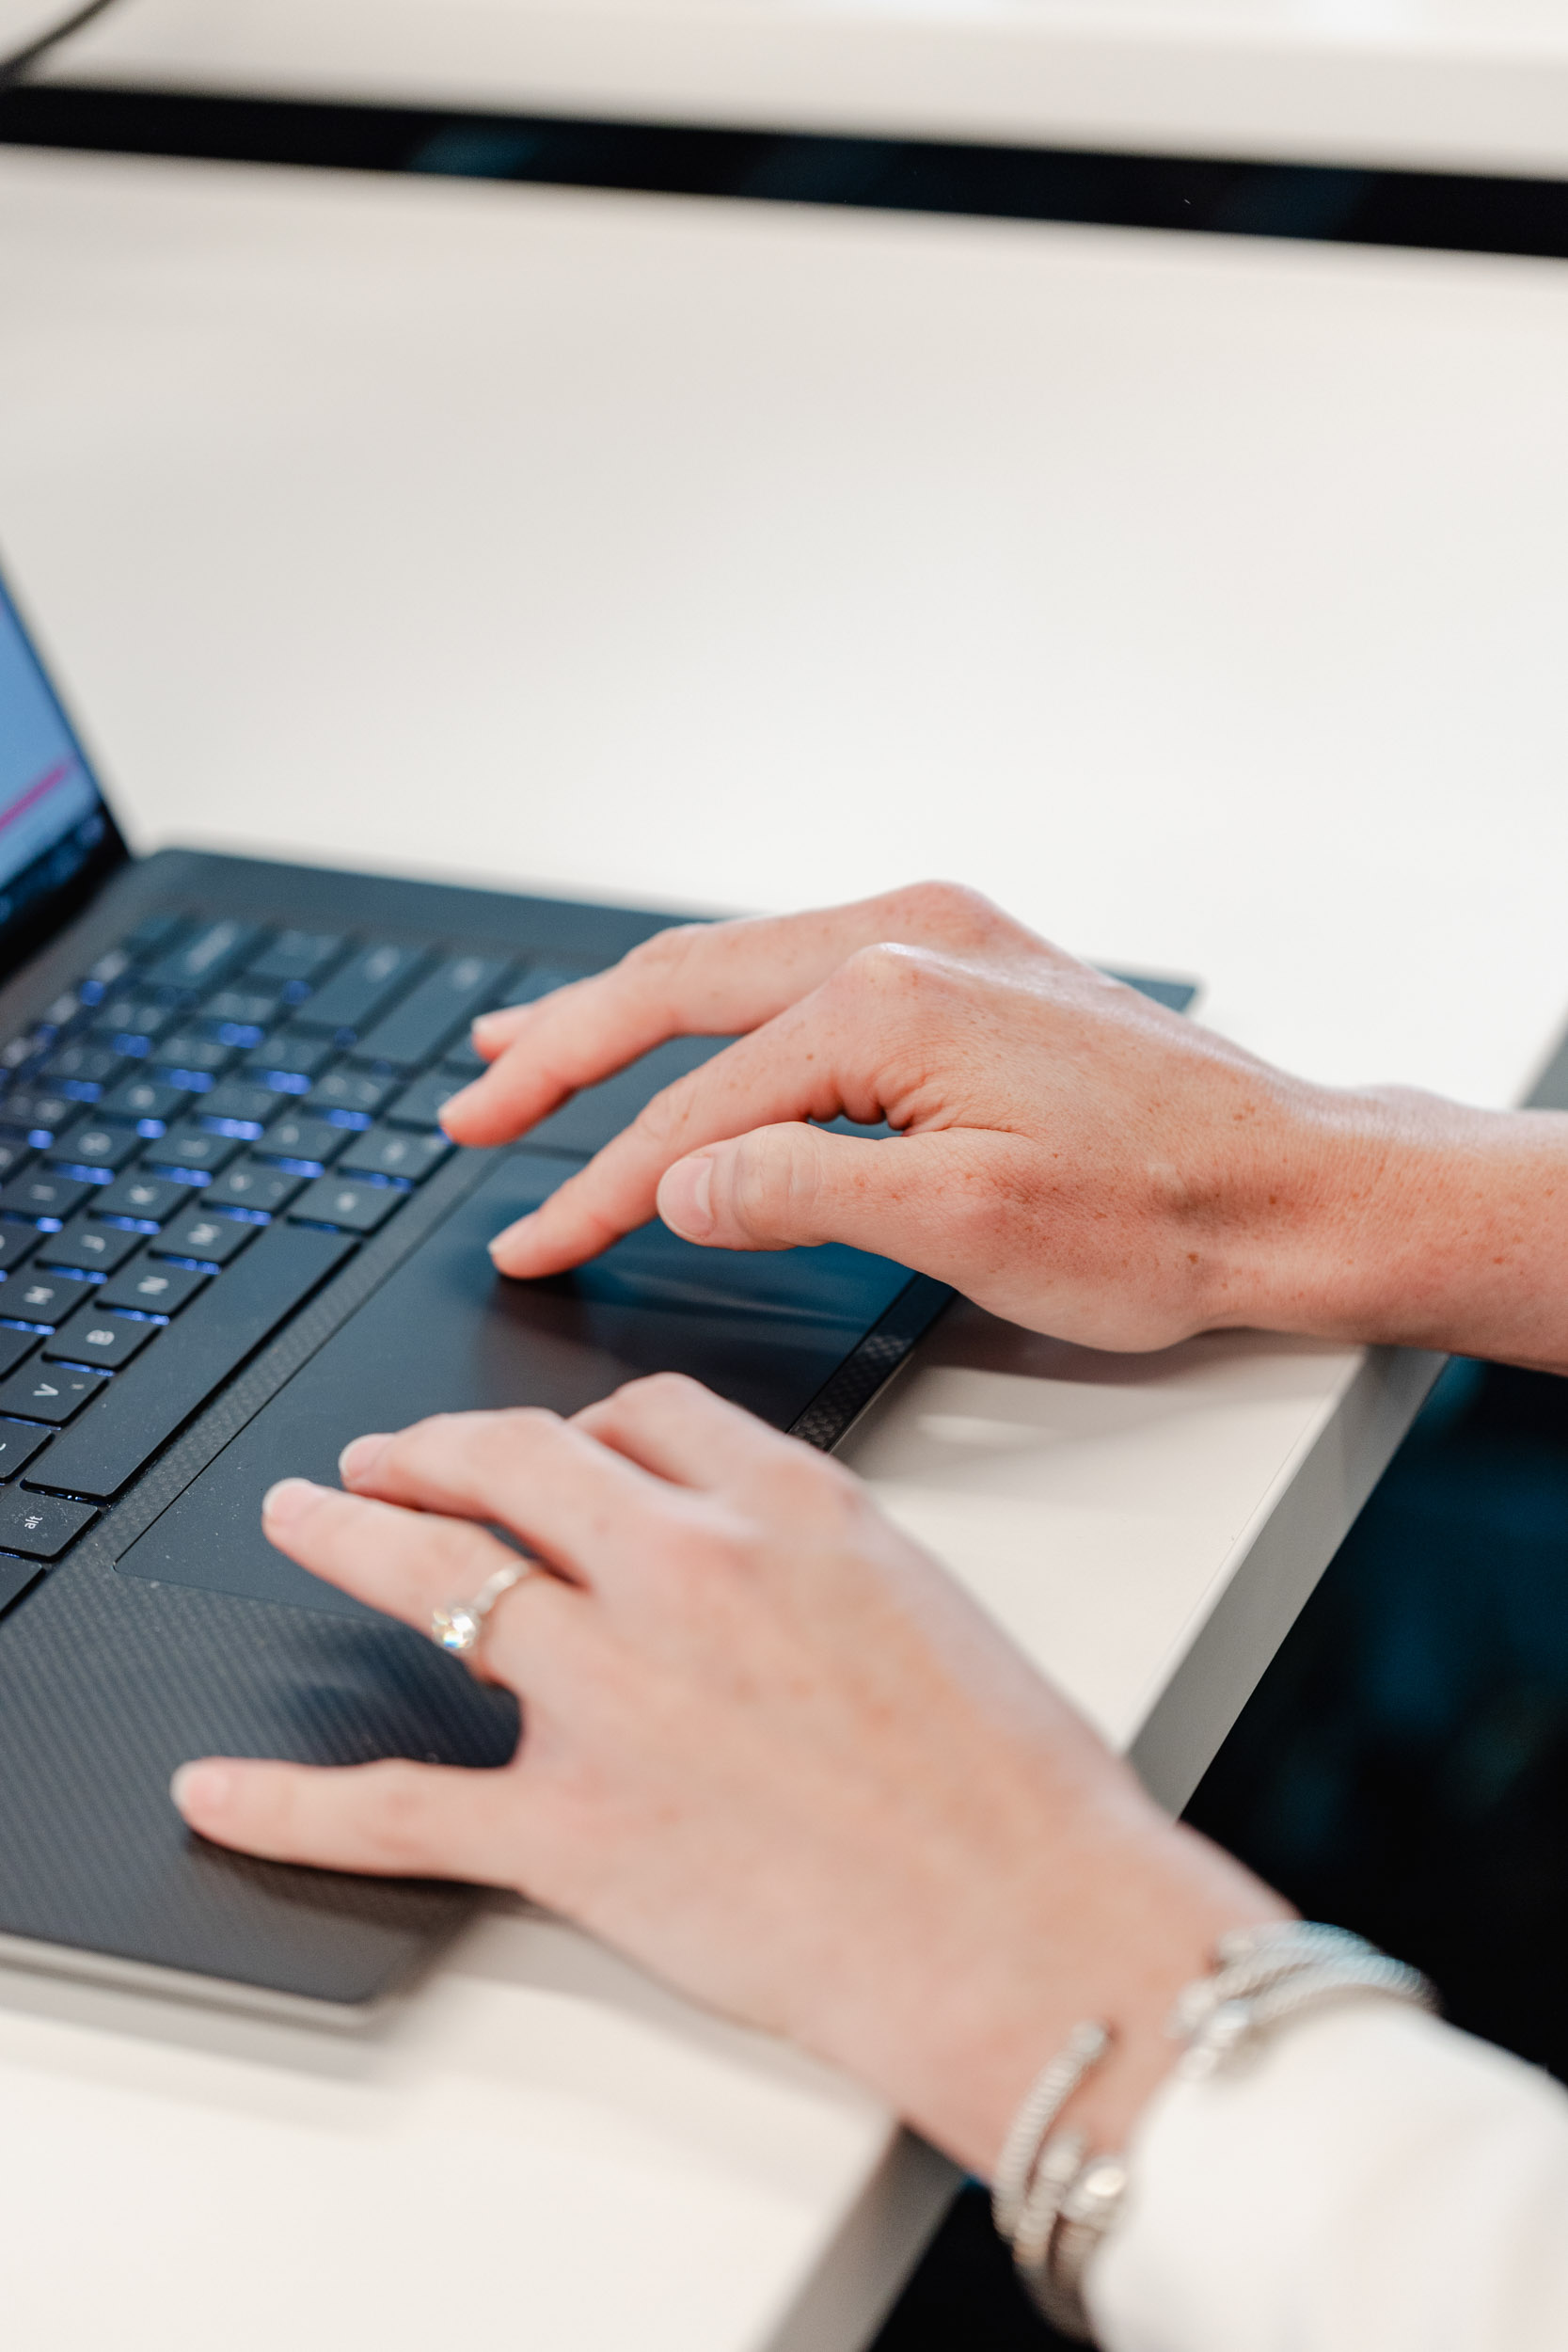 A woman's hands engaging in Index Exchange while typing on a laptop.